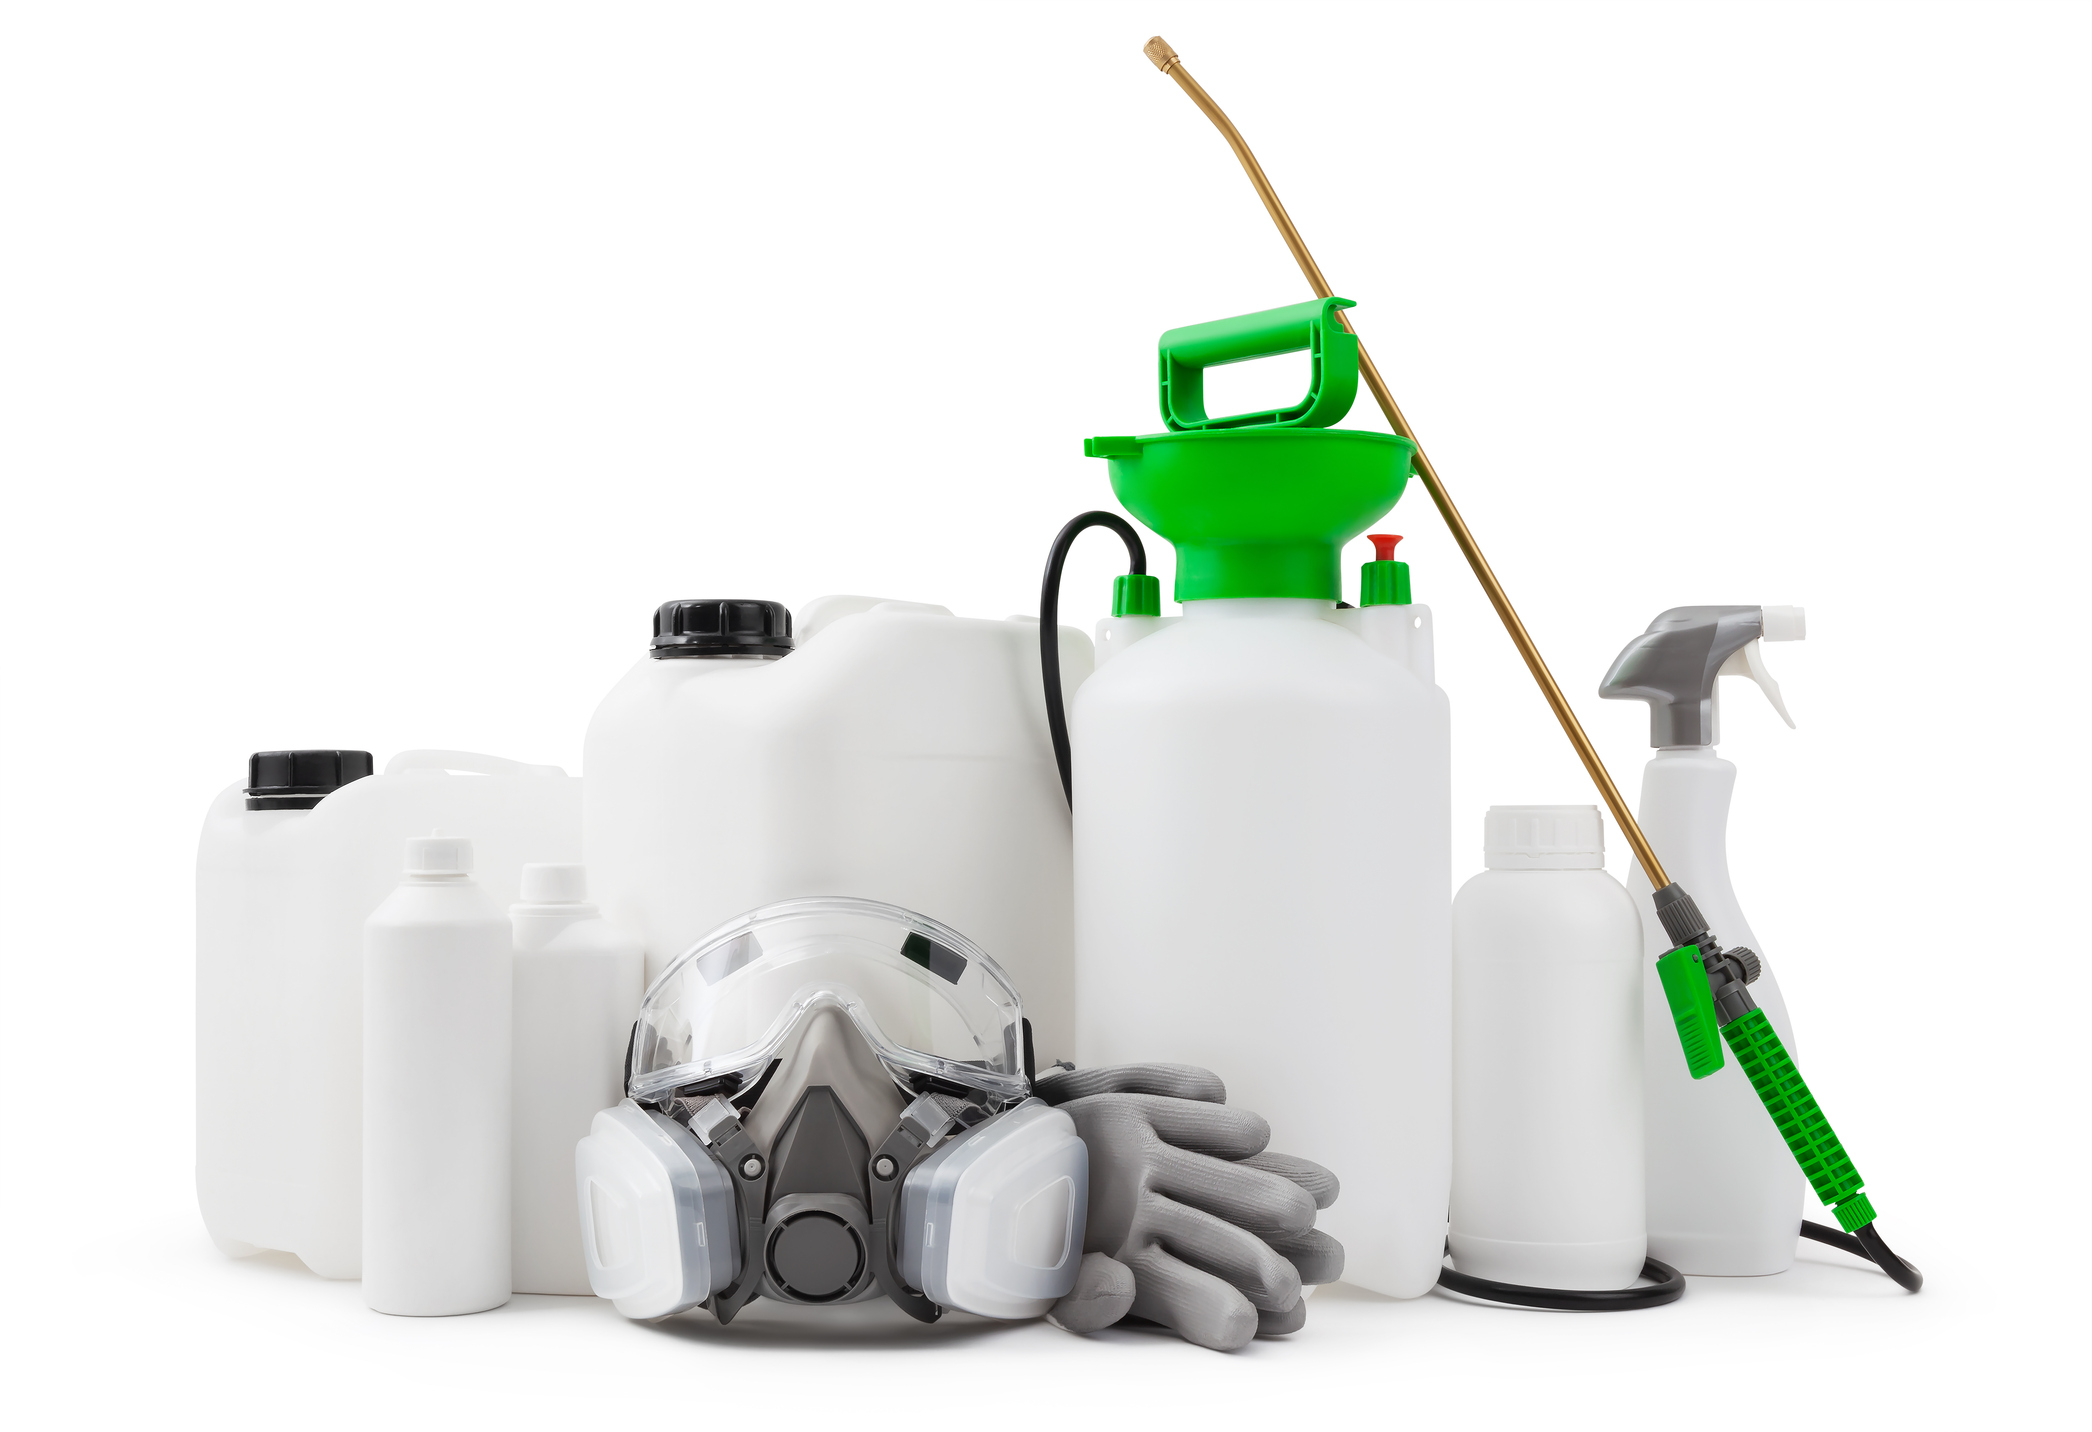 Disinfection, fertilizer and pesticide products isolated on white background with clipping path. Protective respirator mask, pump pressure sprayer and spray bottles for gardening and housekeeping (Photo: iStock - Visivasnc)